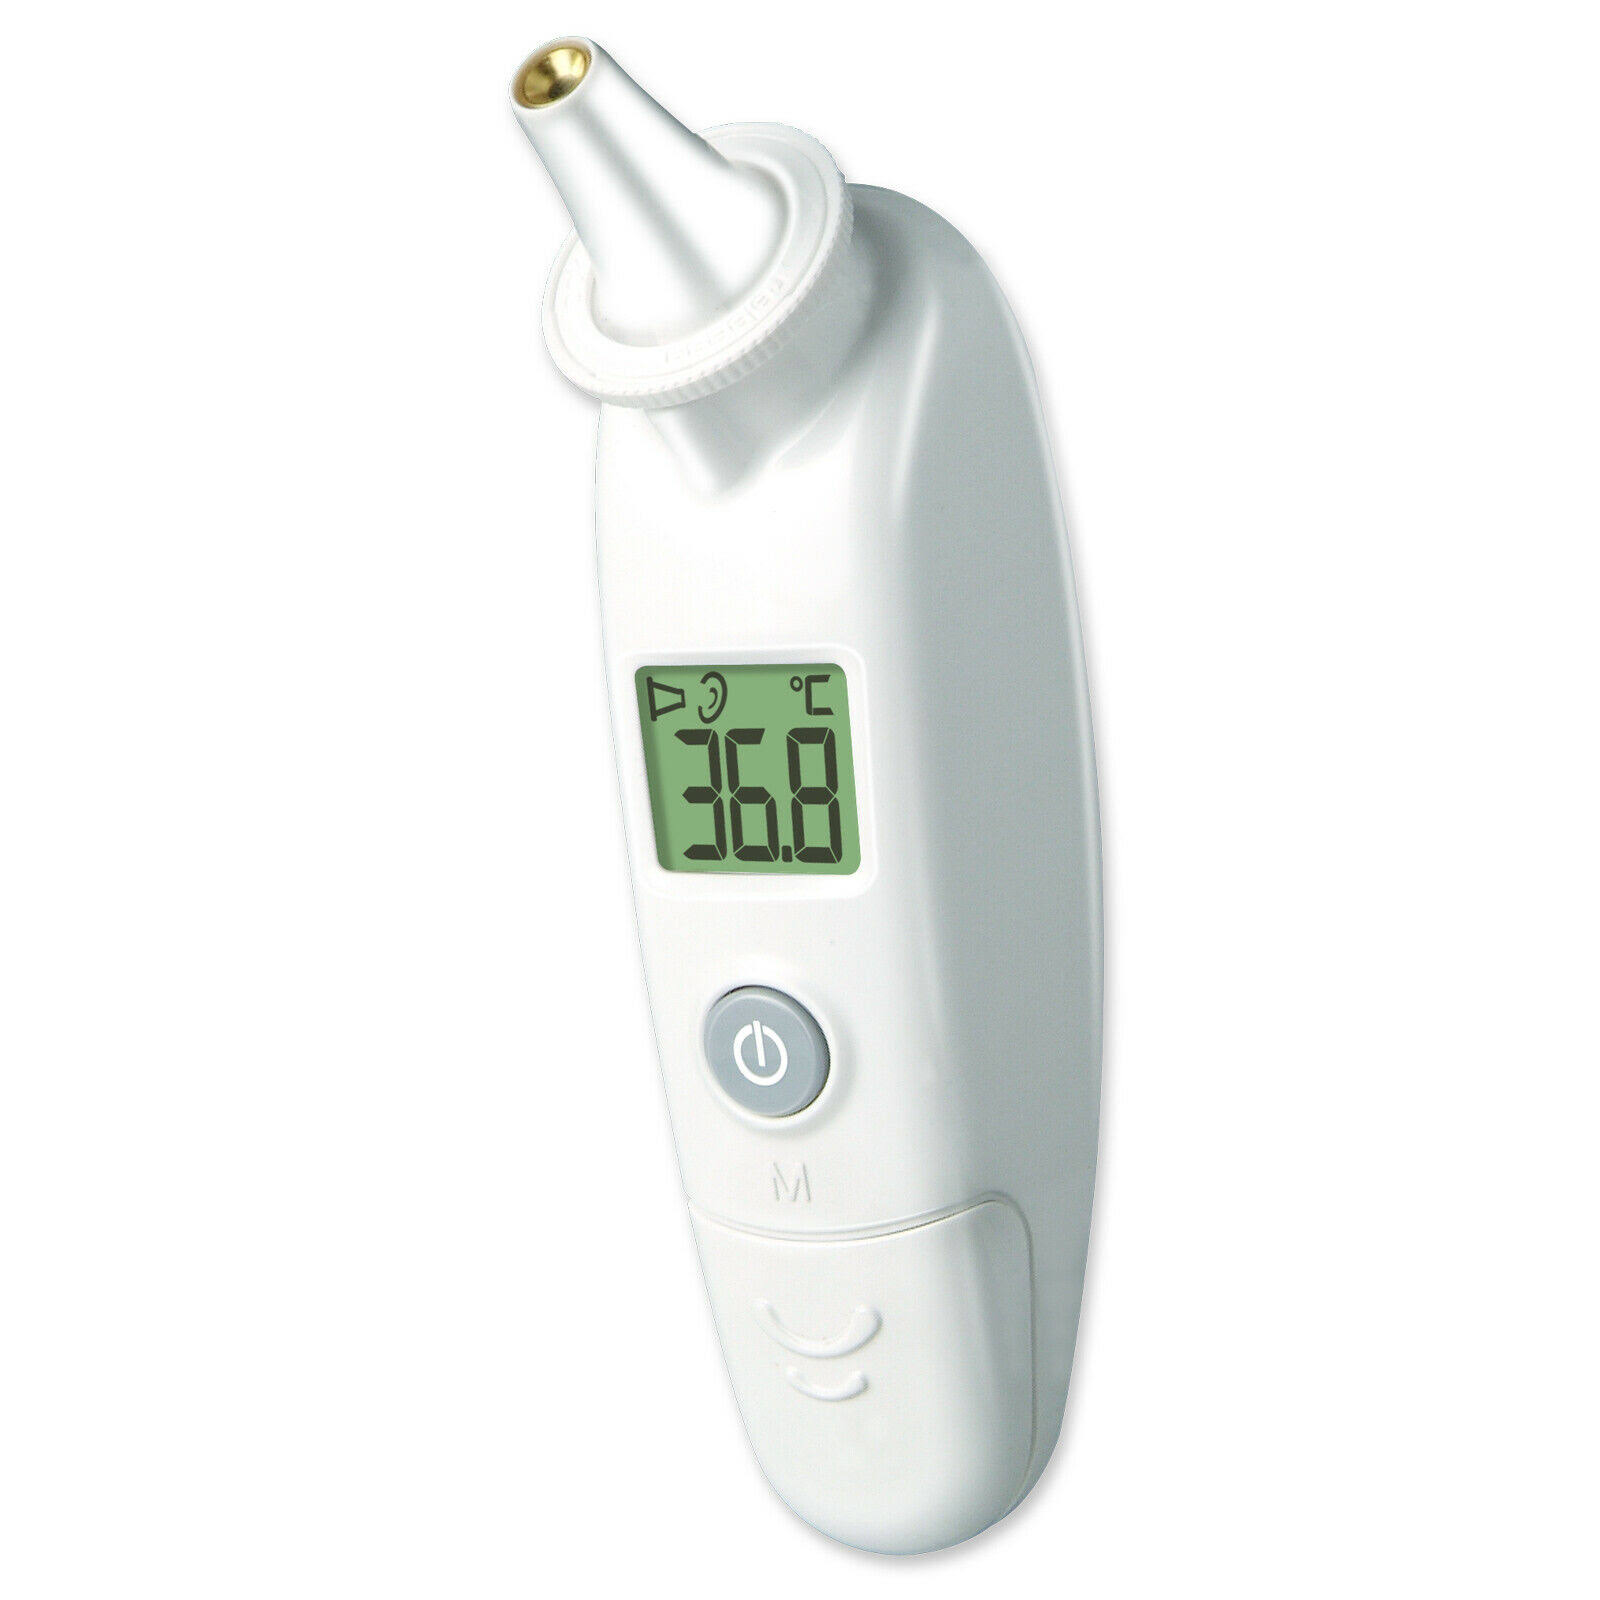 Rossmax RA600 Infrared Ear Thermometer